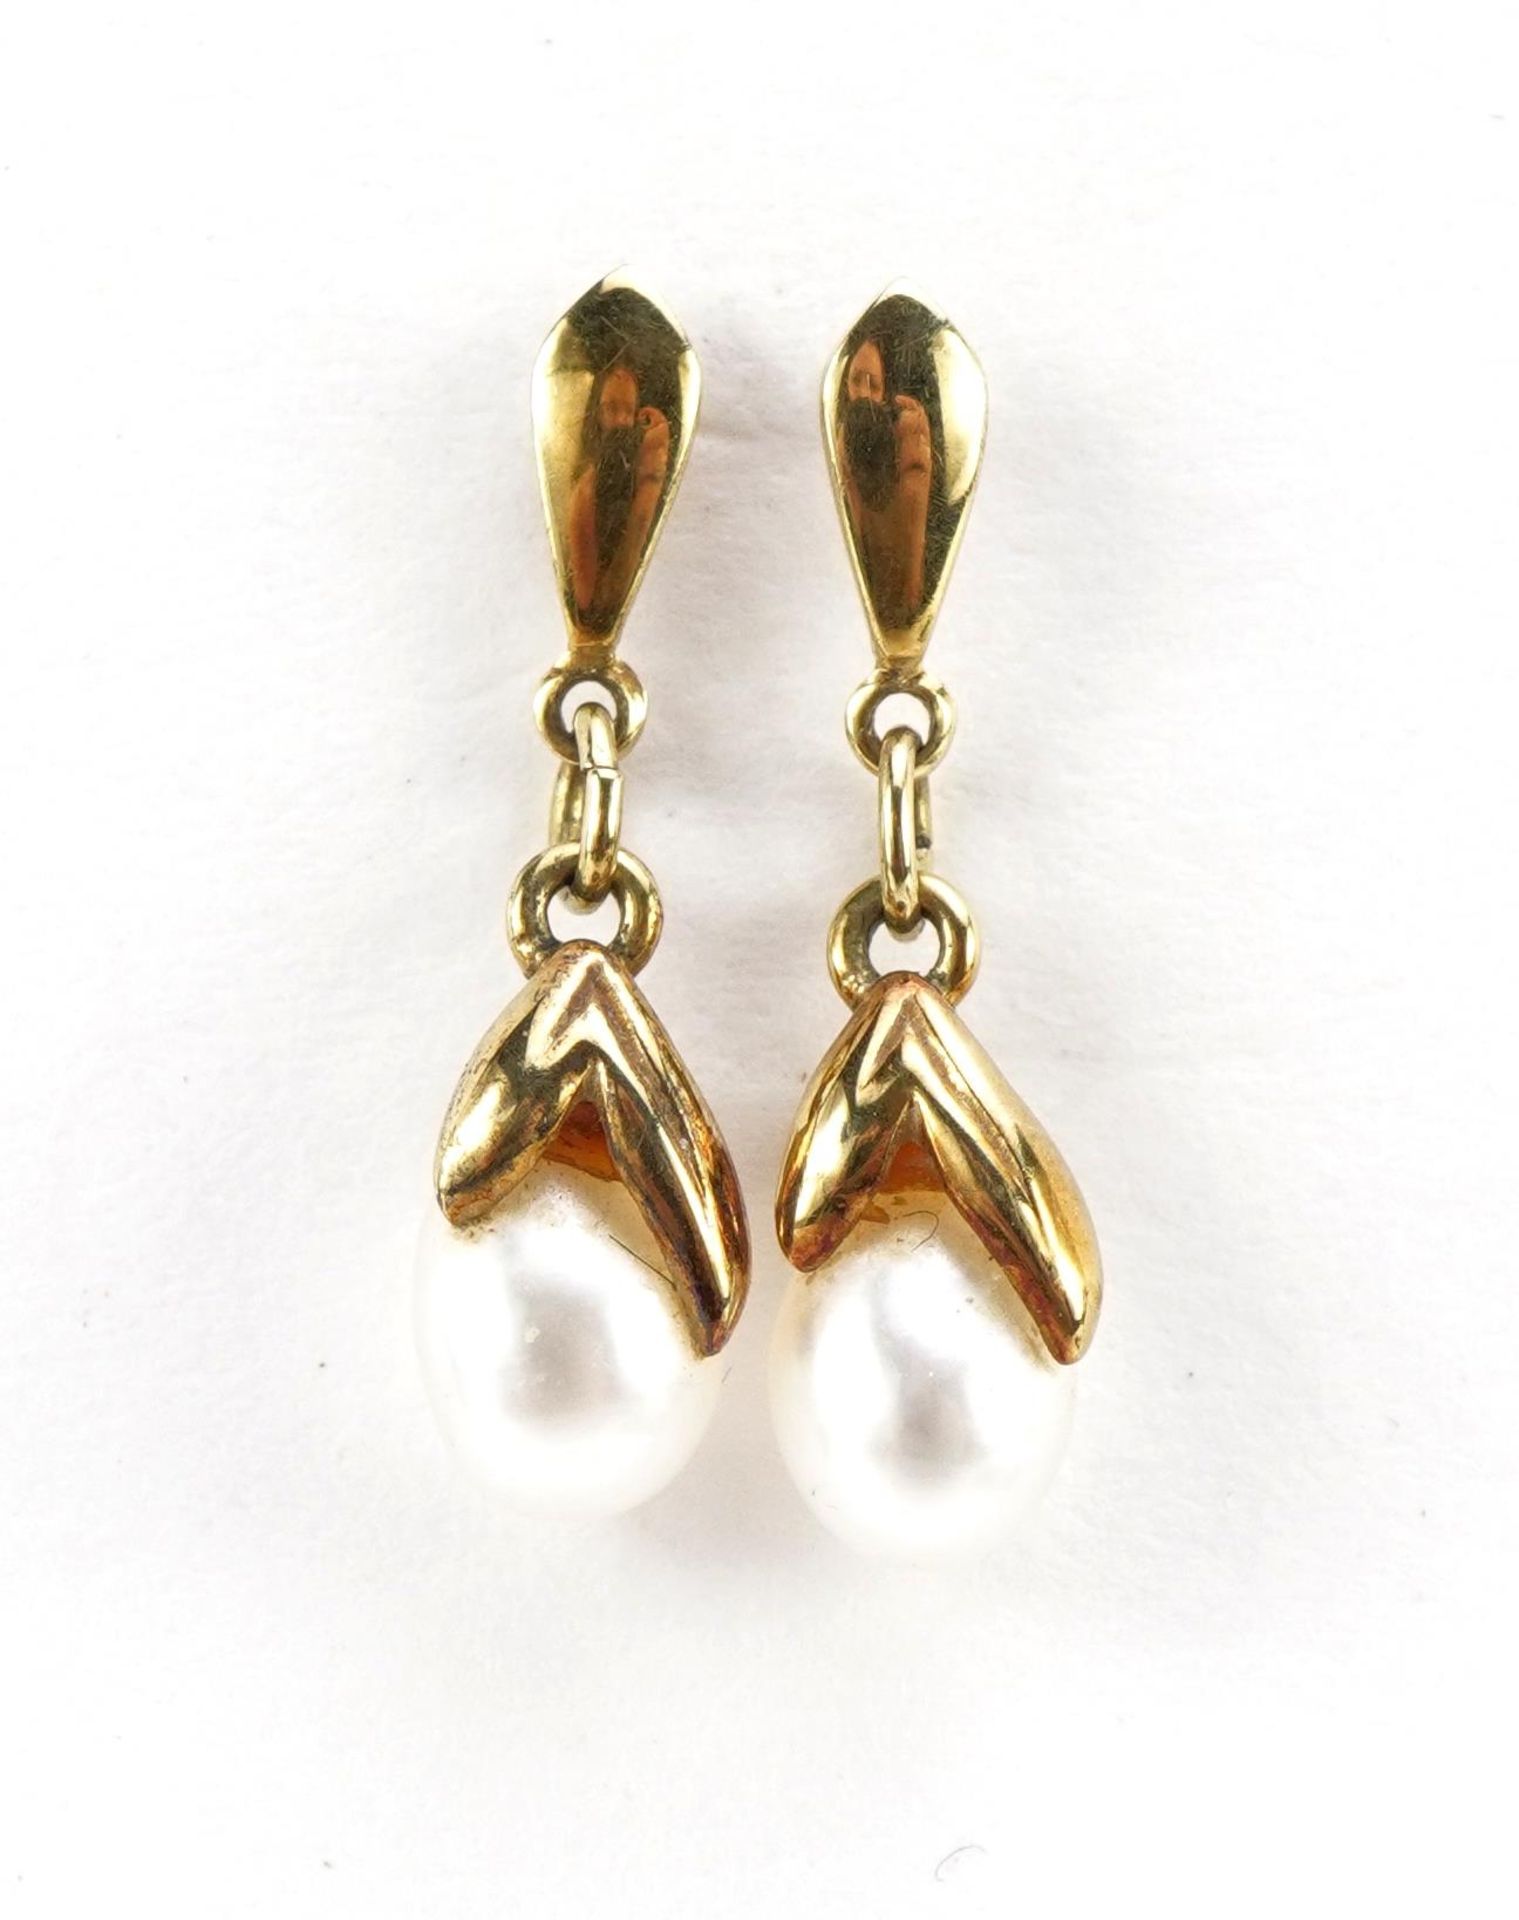 Pair of unmarked gold freshwater pearl drop earrings, 2.1cm high, 1.4g : For further information